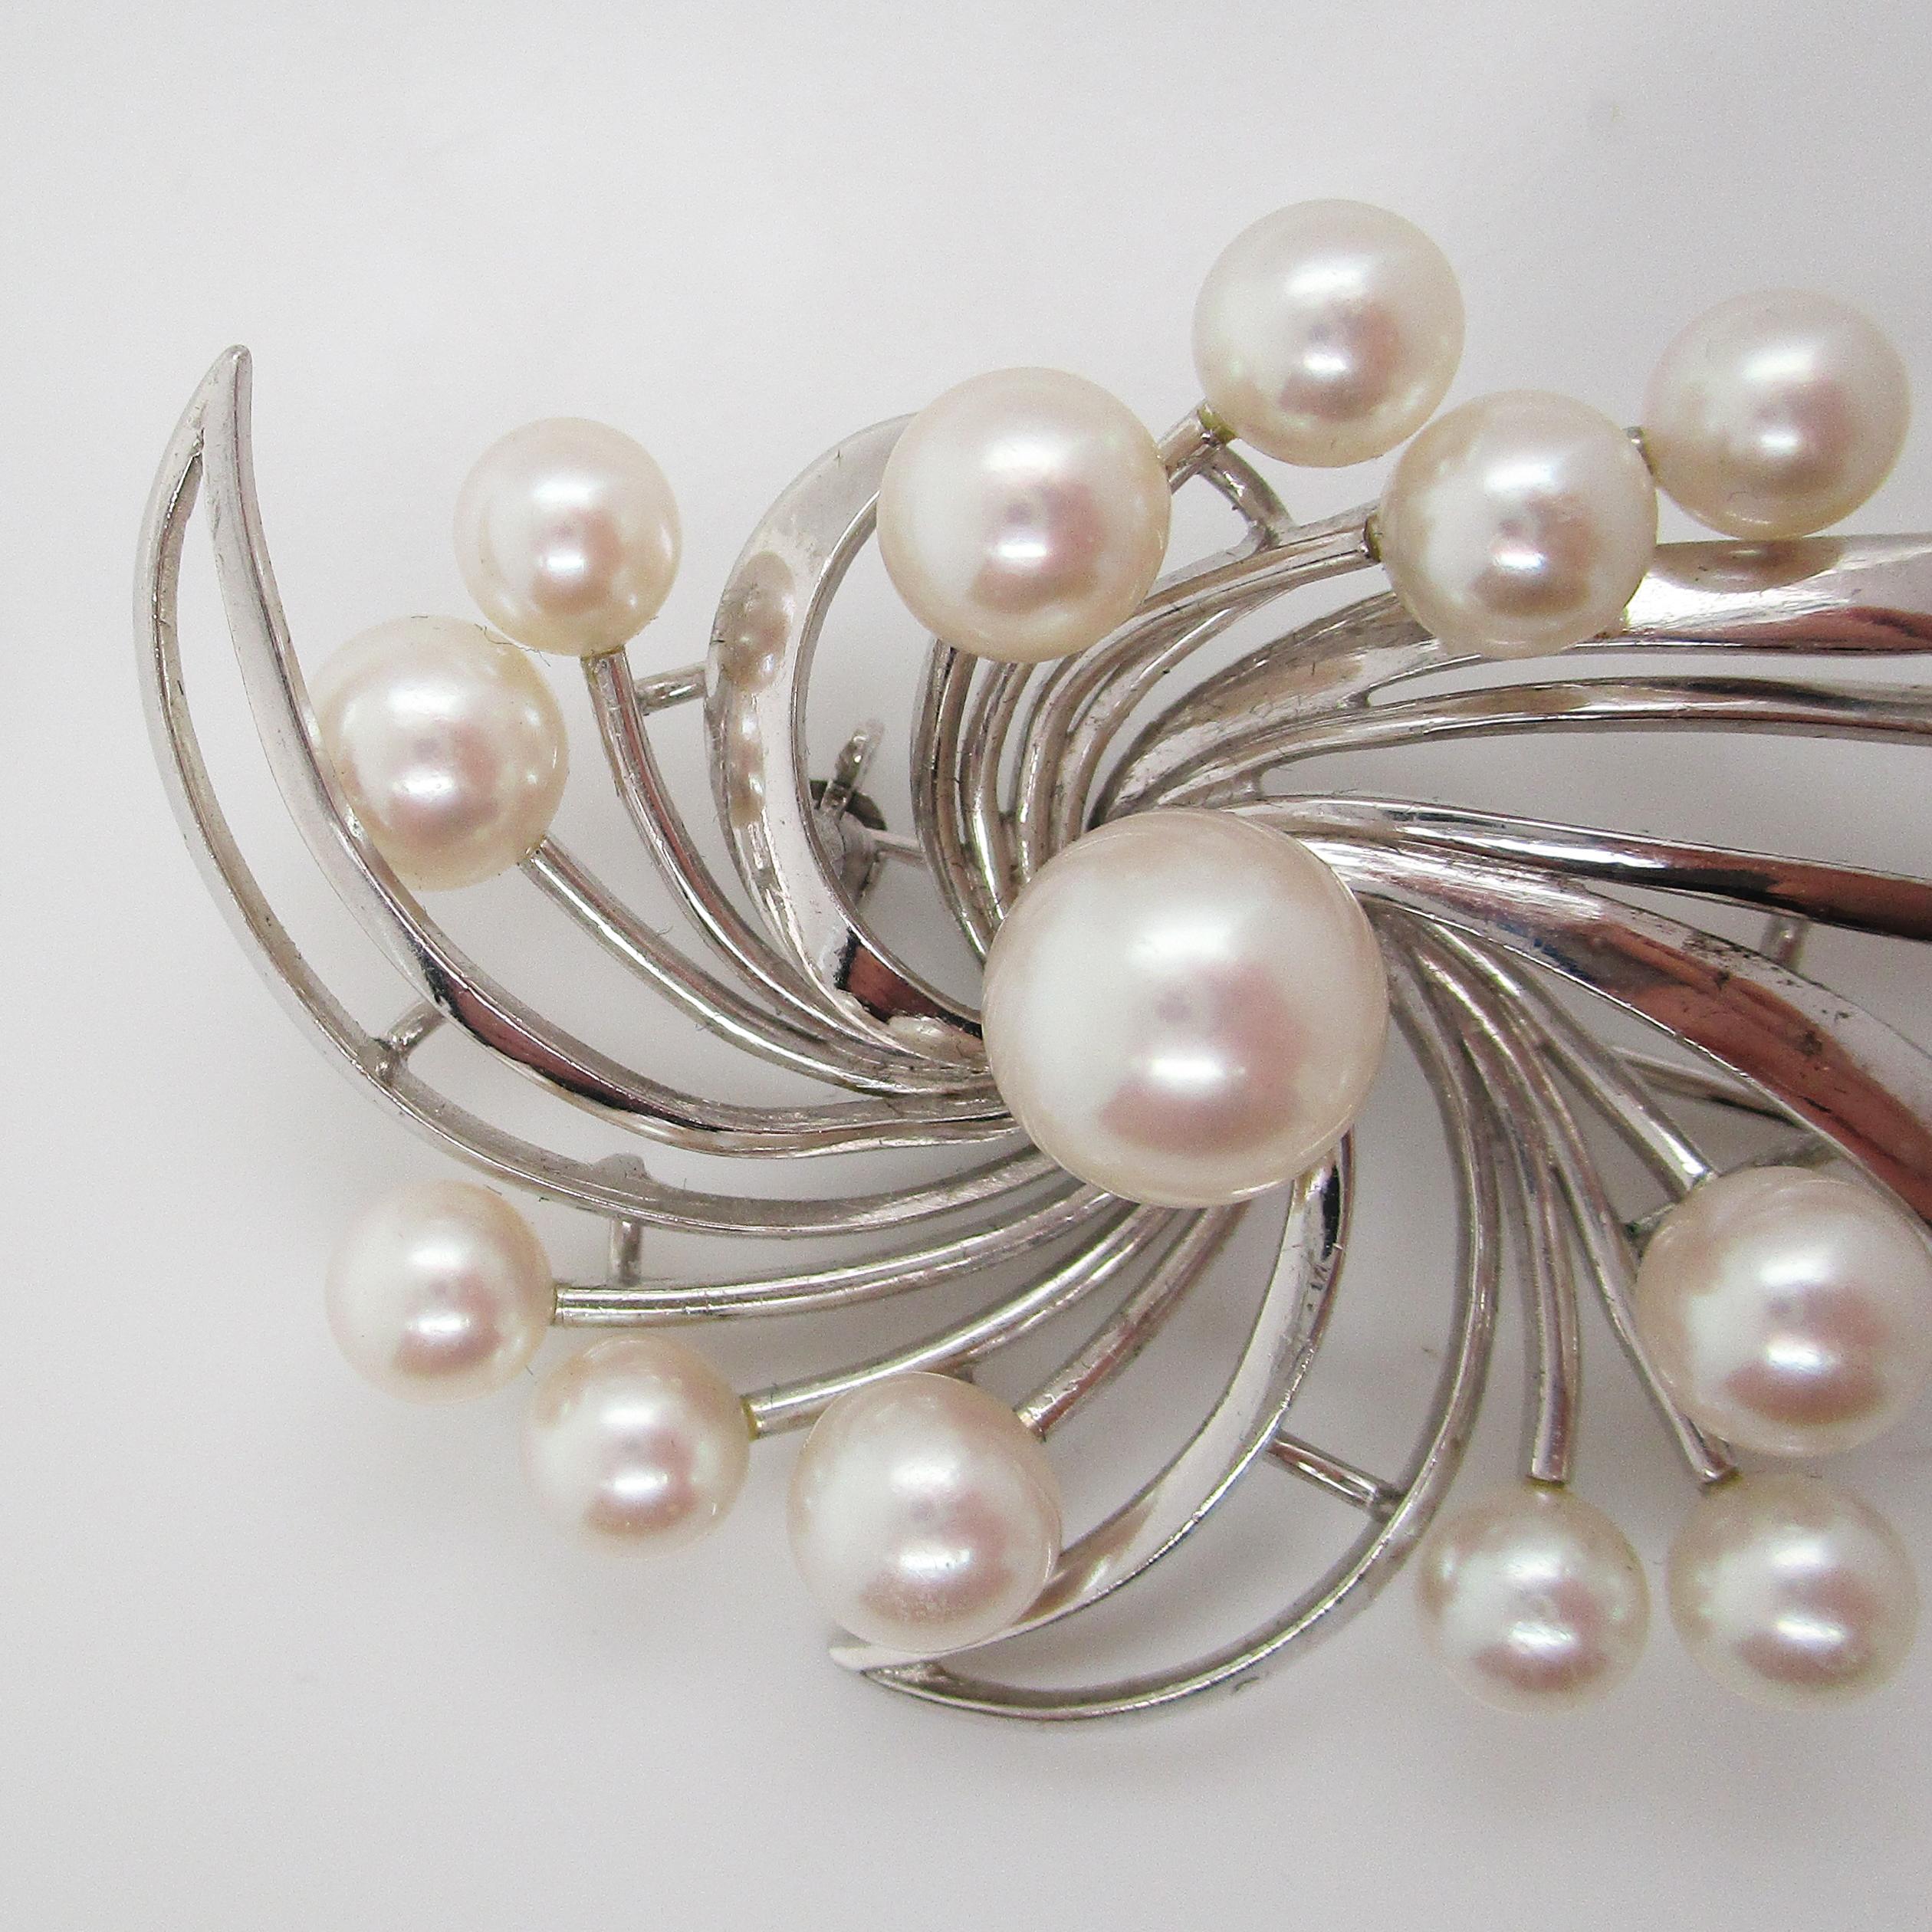 This excellent spray brooch is a lovely mid-century design in 14k white gold with a beautiful array of Mikimoto pearls! The pearls all have an incredible luster and a beautiful white color. The spray design of the brooch is the perfect display for